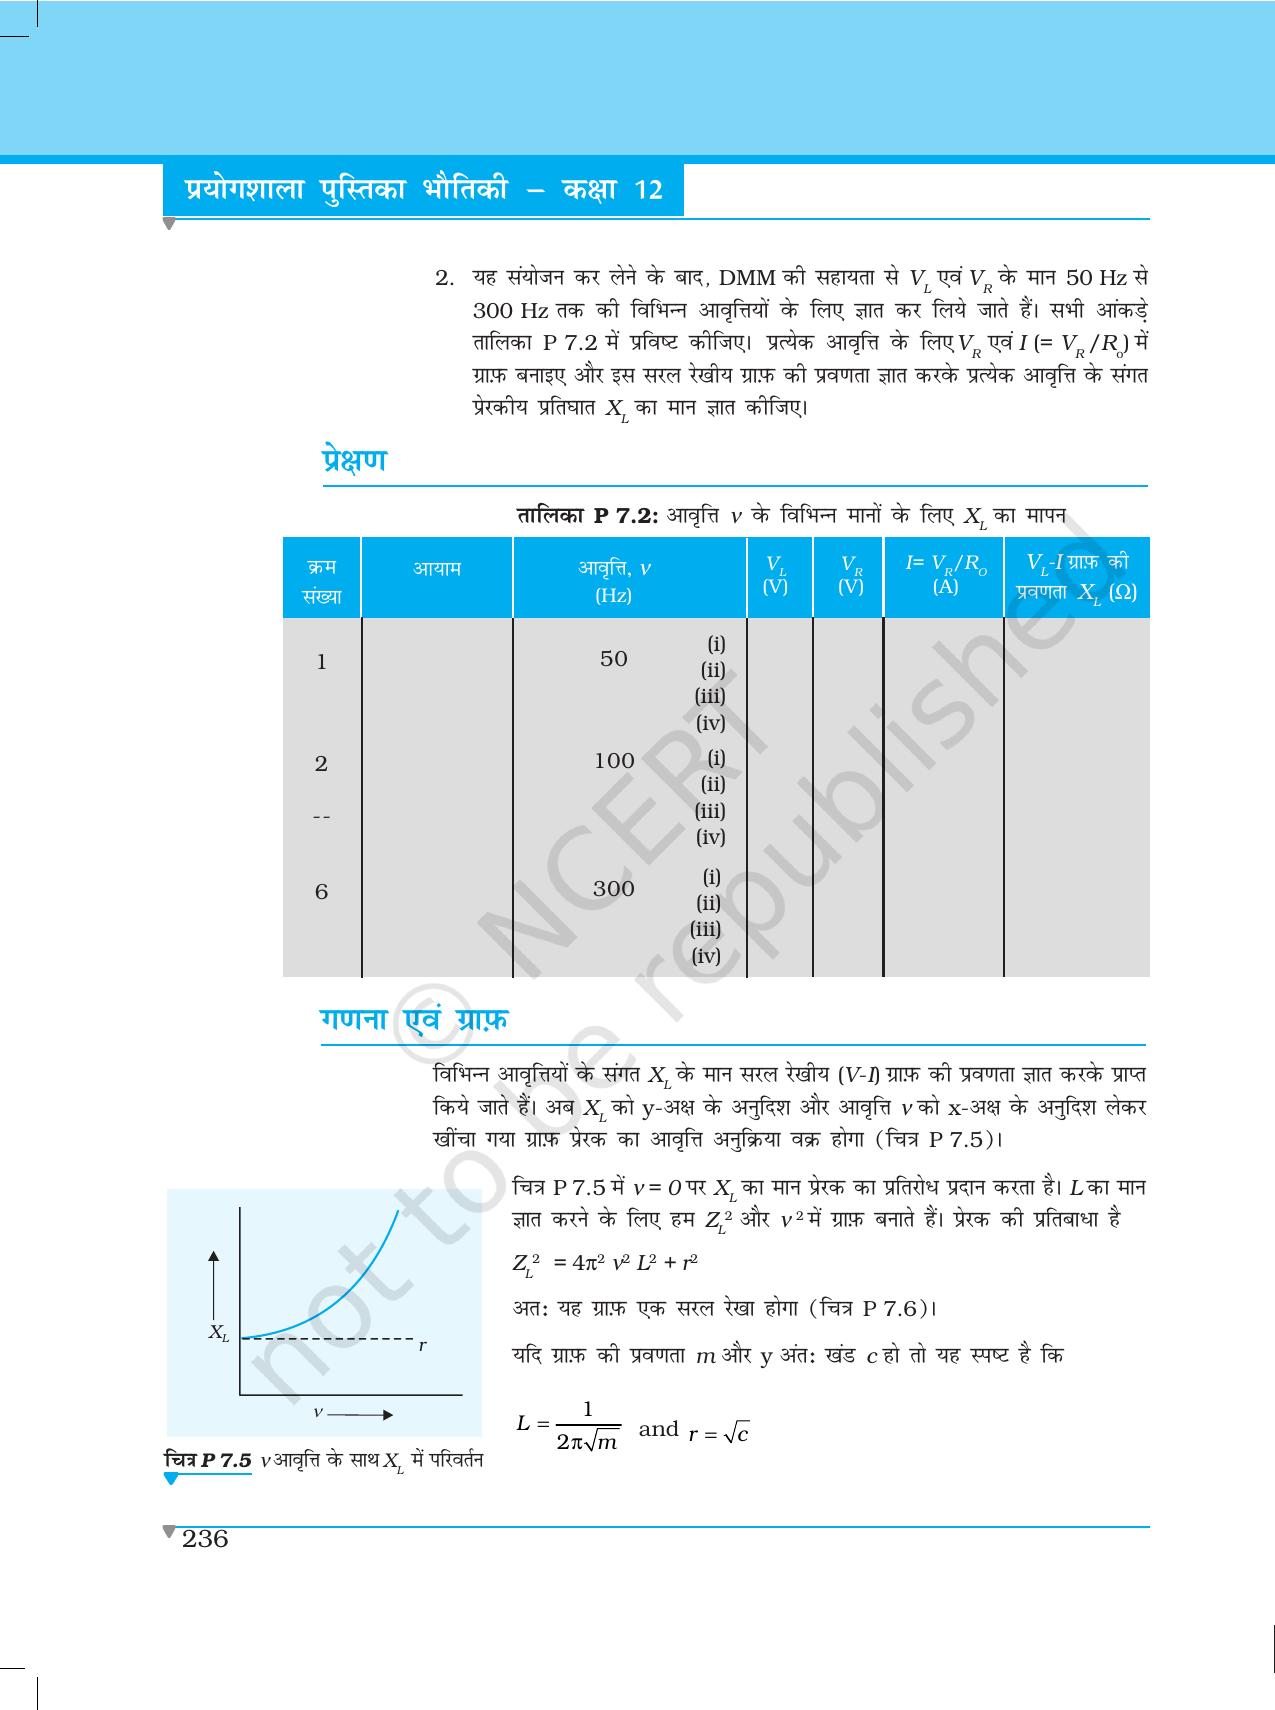 NCERT Laboratory Manuals for Class XII भौतिकी - परियोजना (1 - 7) - Page 30